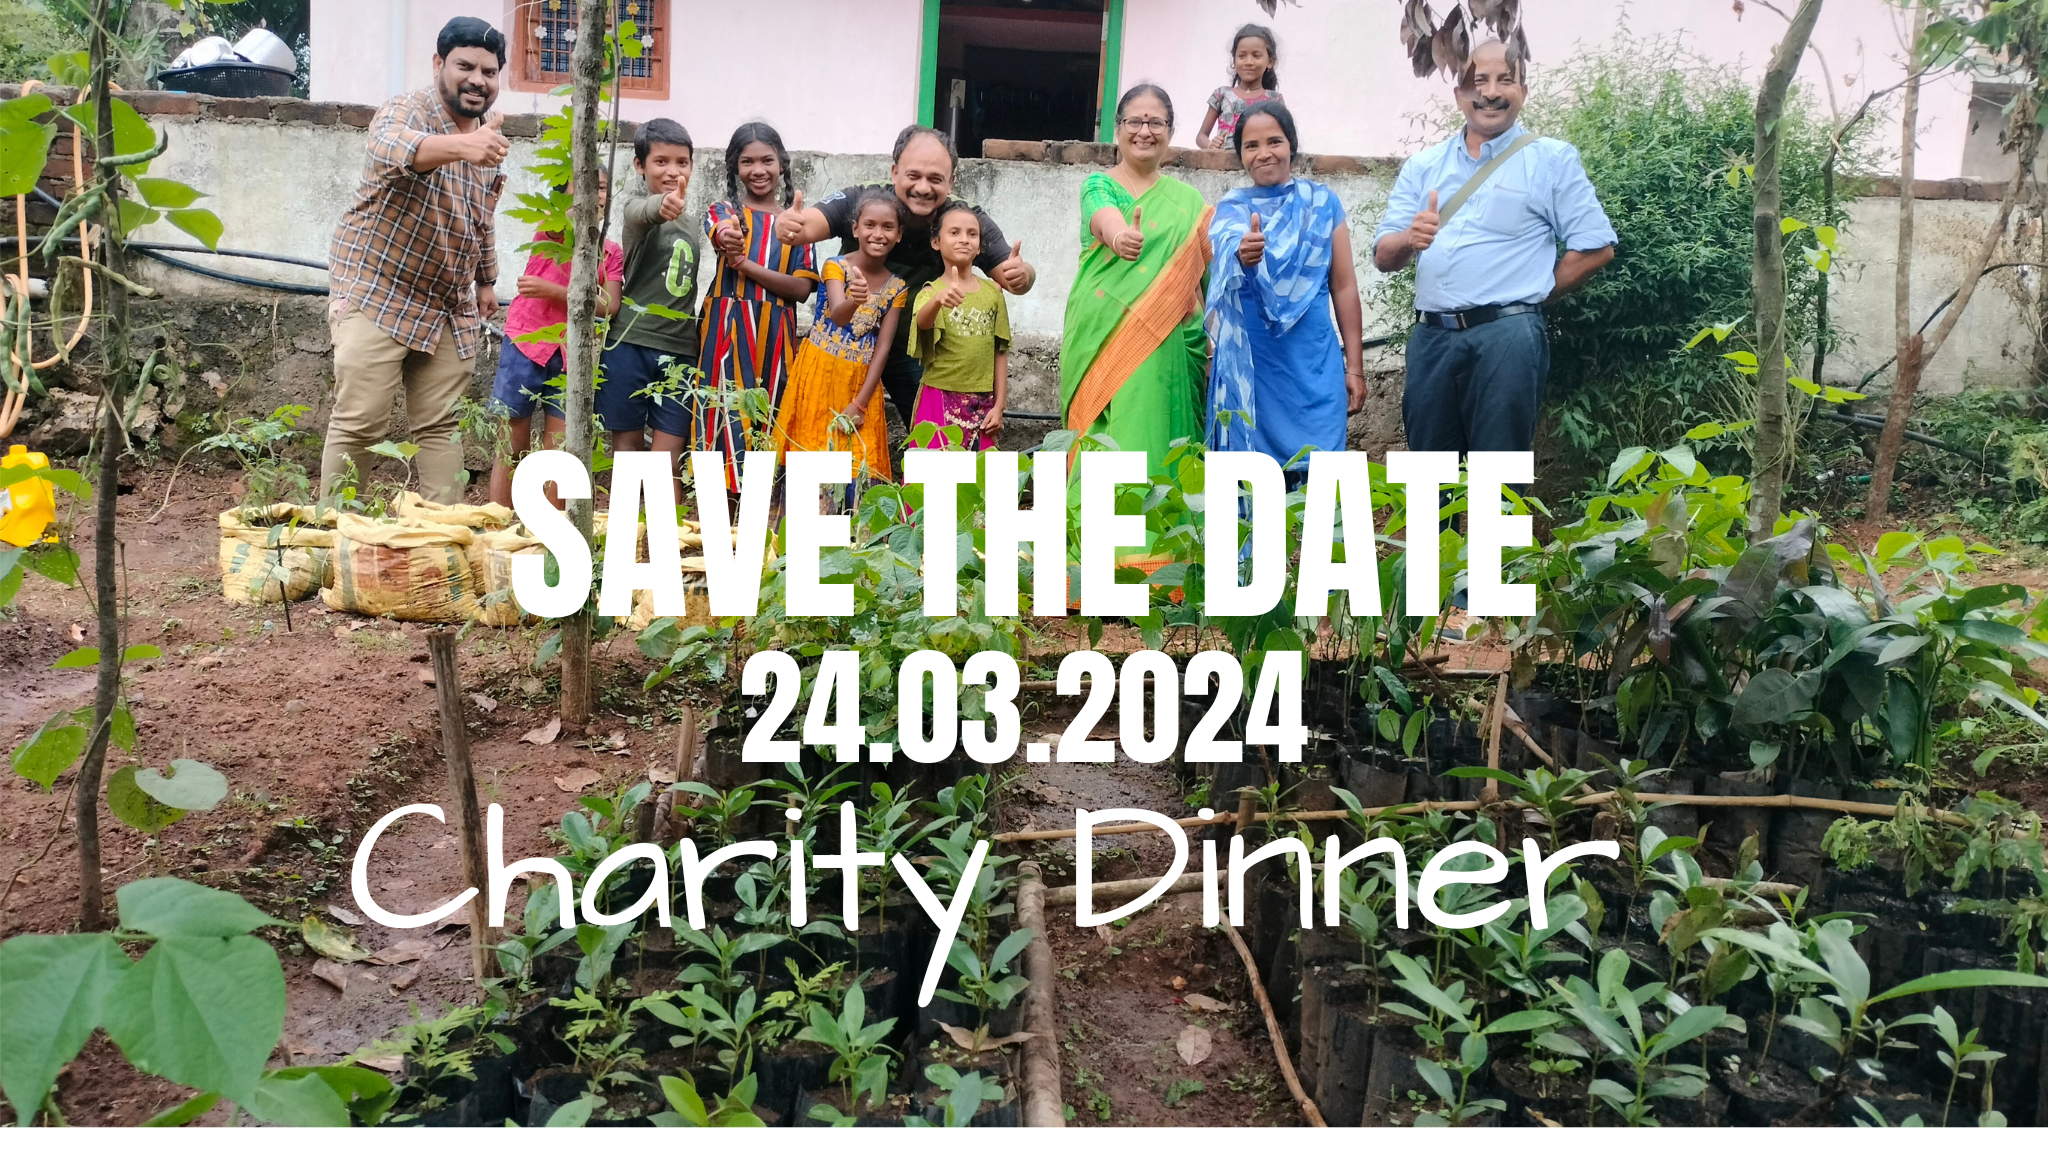 Dignity asbl – Charity dinner